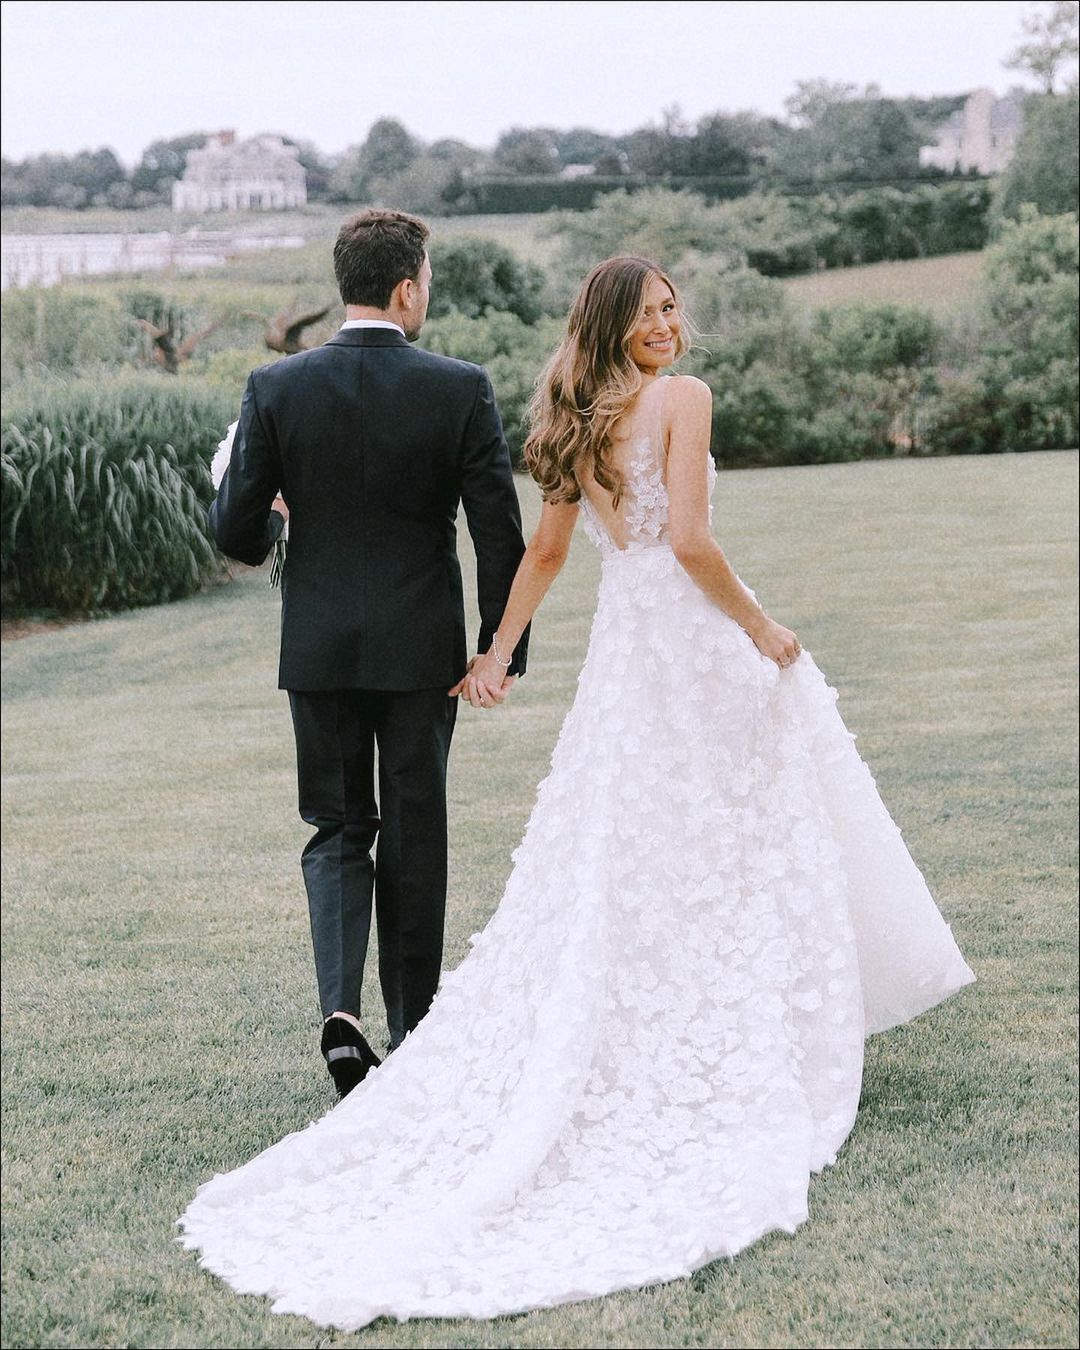 Corey Golden Farber wearing Suri gown and matching veil